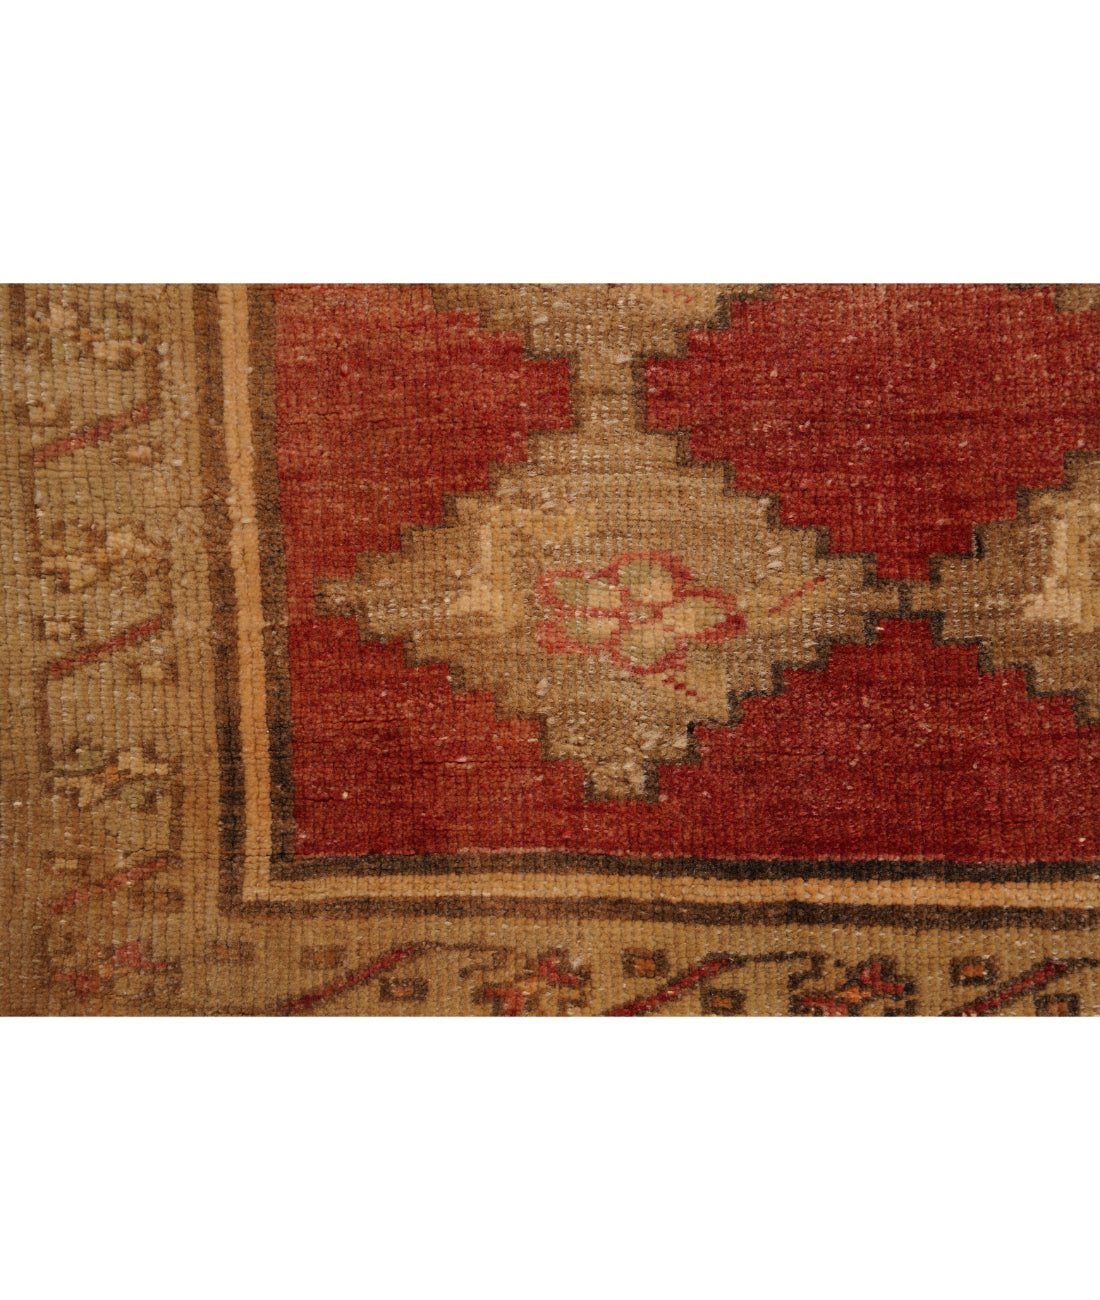 Anatolian 5' 0" X 11' 8" Hand-Knotted Wool Rug 5' 0" X 11' 8" (152 X 356) / Red / Taupe